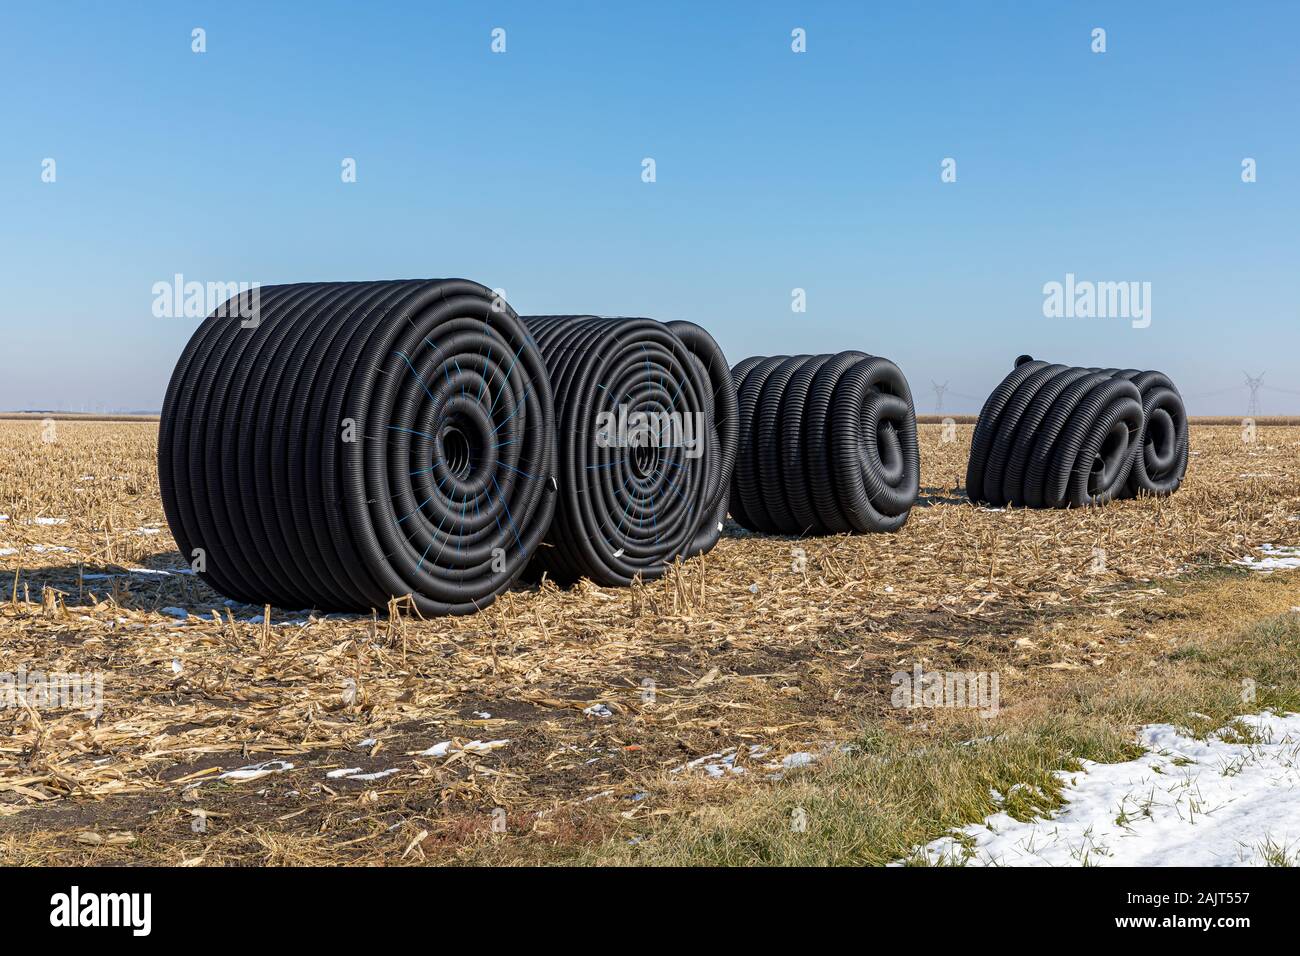 Coiled rolls of black perforated plastic drainage pipe, field tile, sitting in field after harvest ready to be buried underground during winter Stock Photo